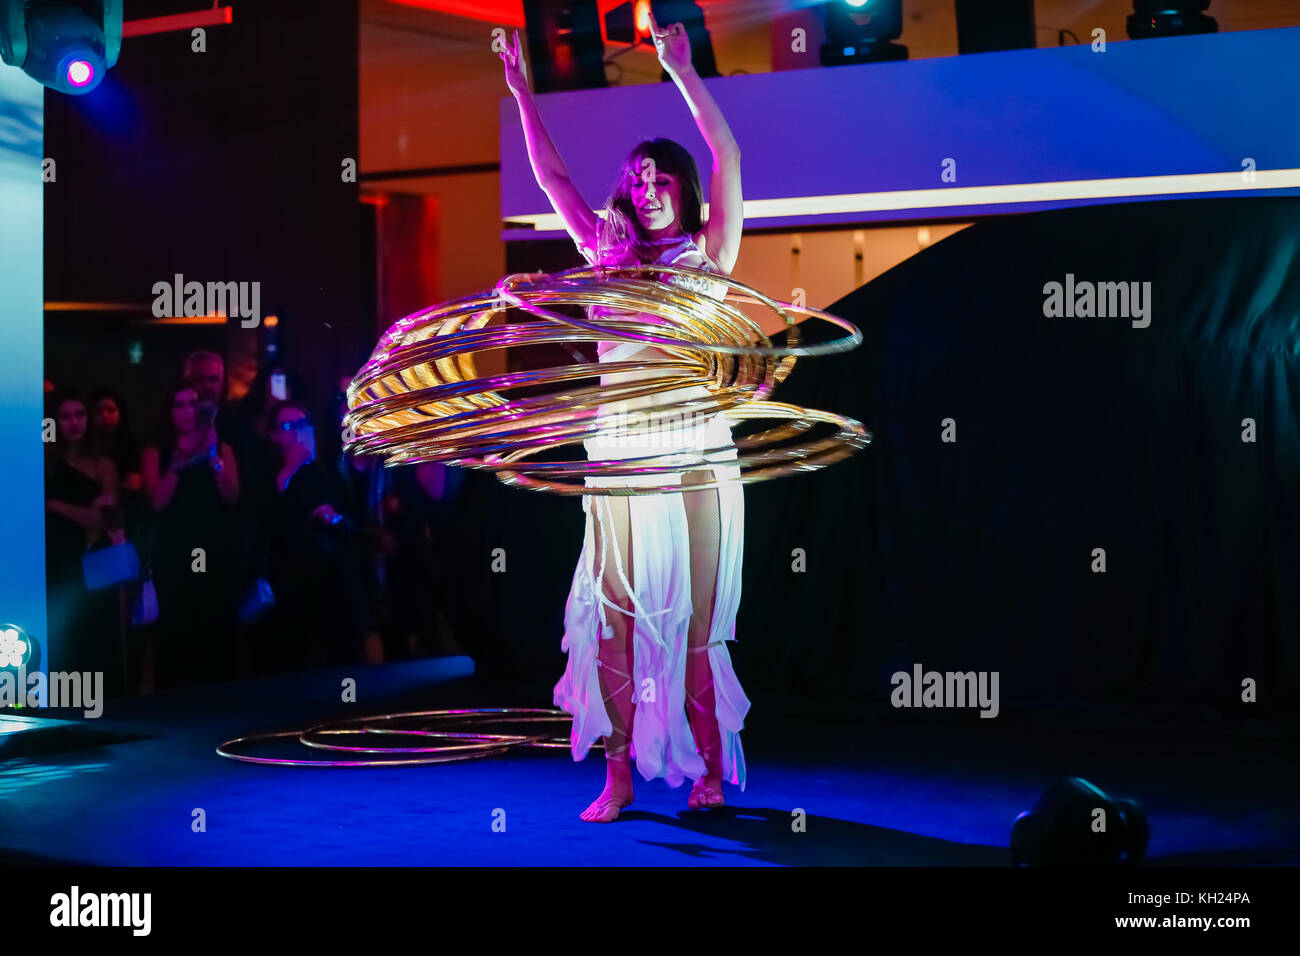 Hula hoop dancer performing in a ceremony Stock Photo